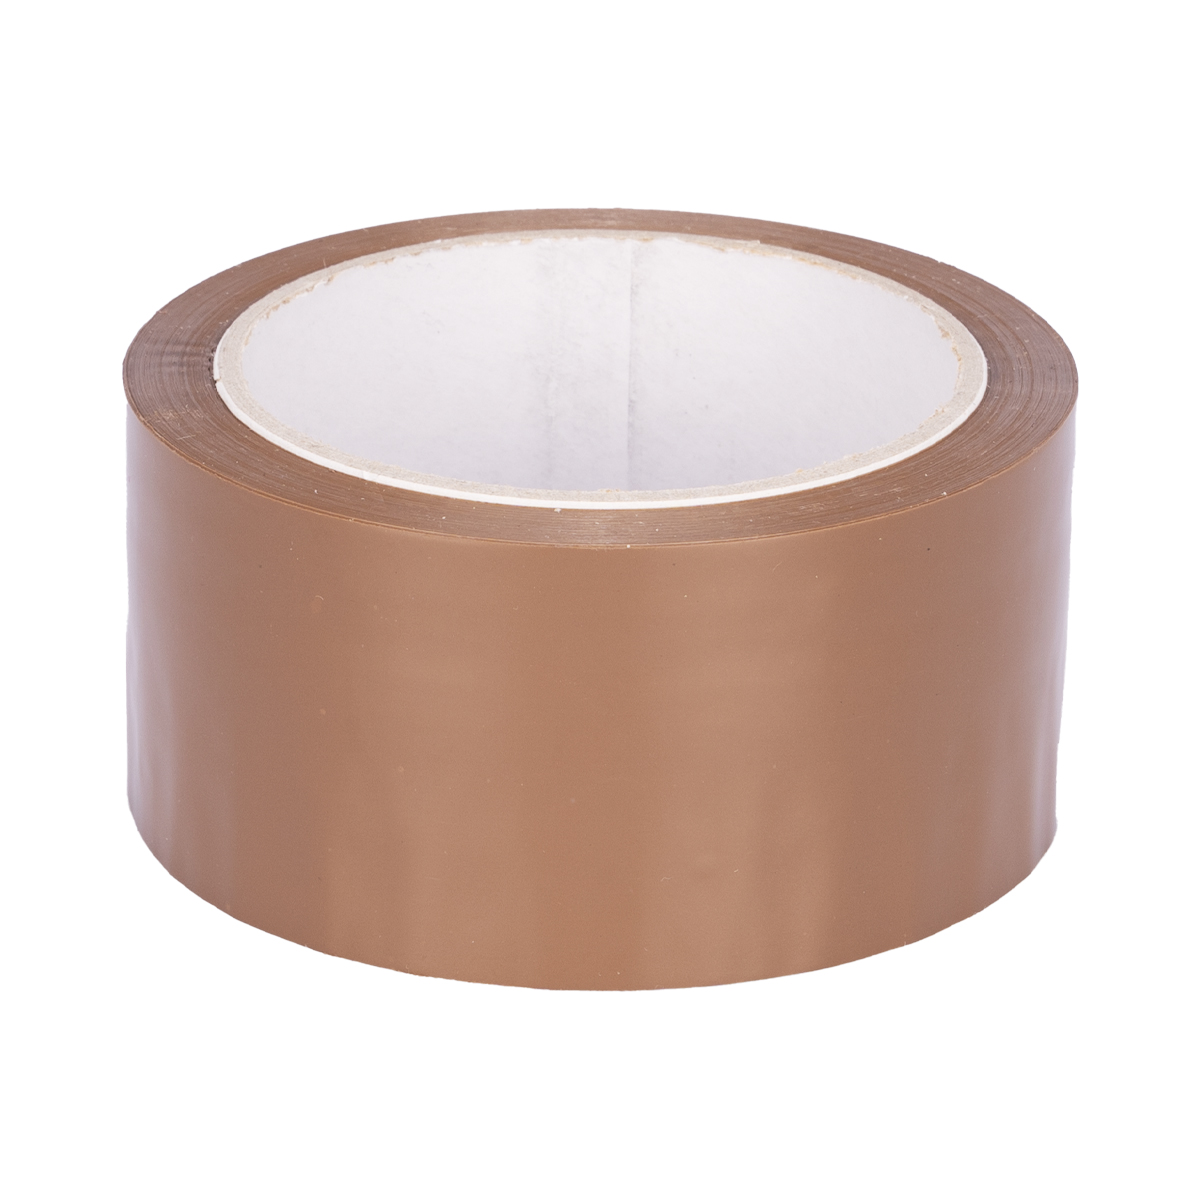 Adhesive tape pp 66m x 50mm Quiet unrolling Brown